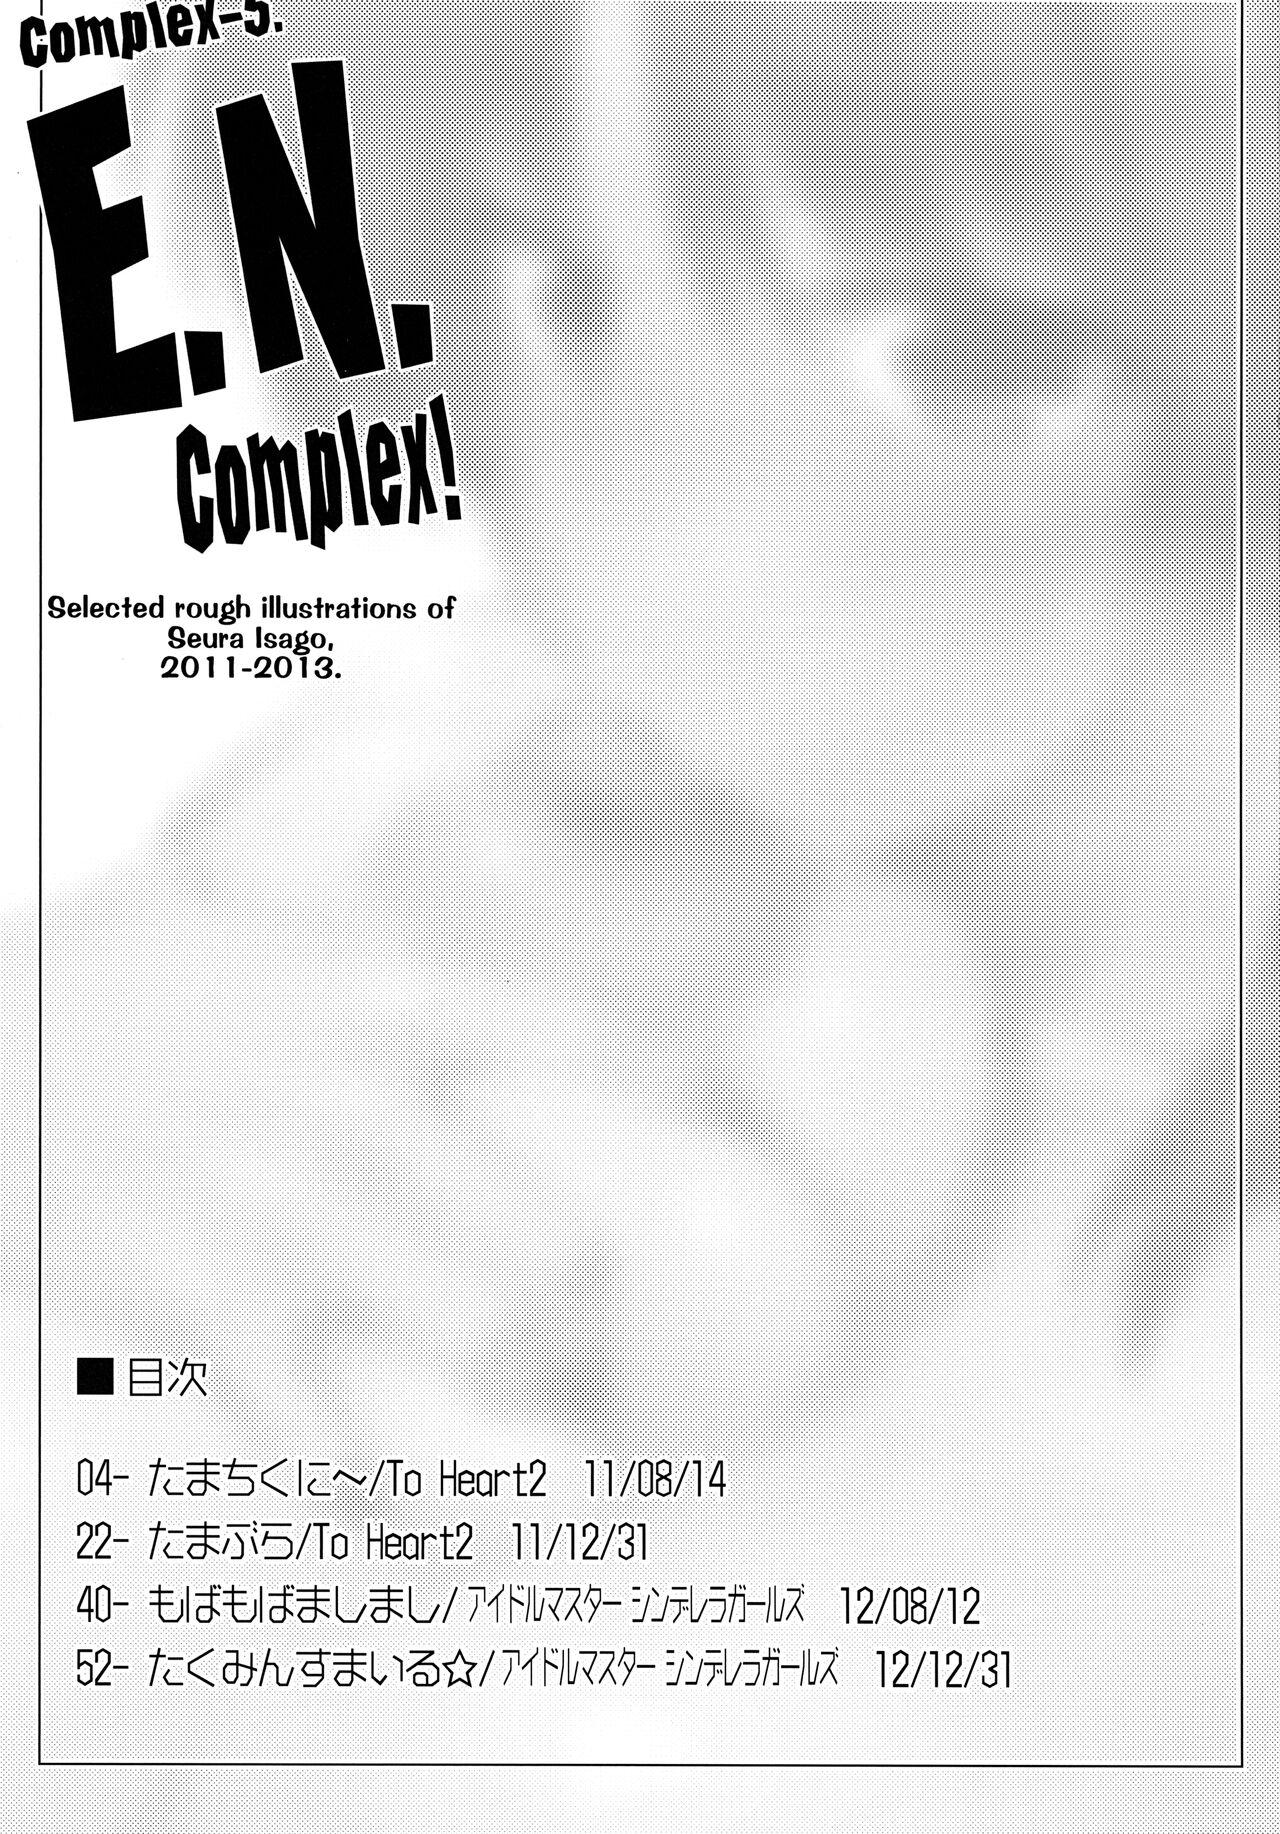 Couple Sex Complex-5. E.N.Complex! - The idolmaster Toheart2 Sexcams - Page 2